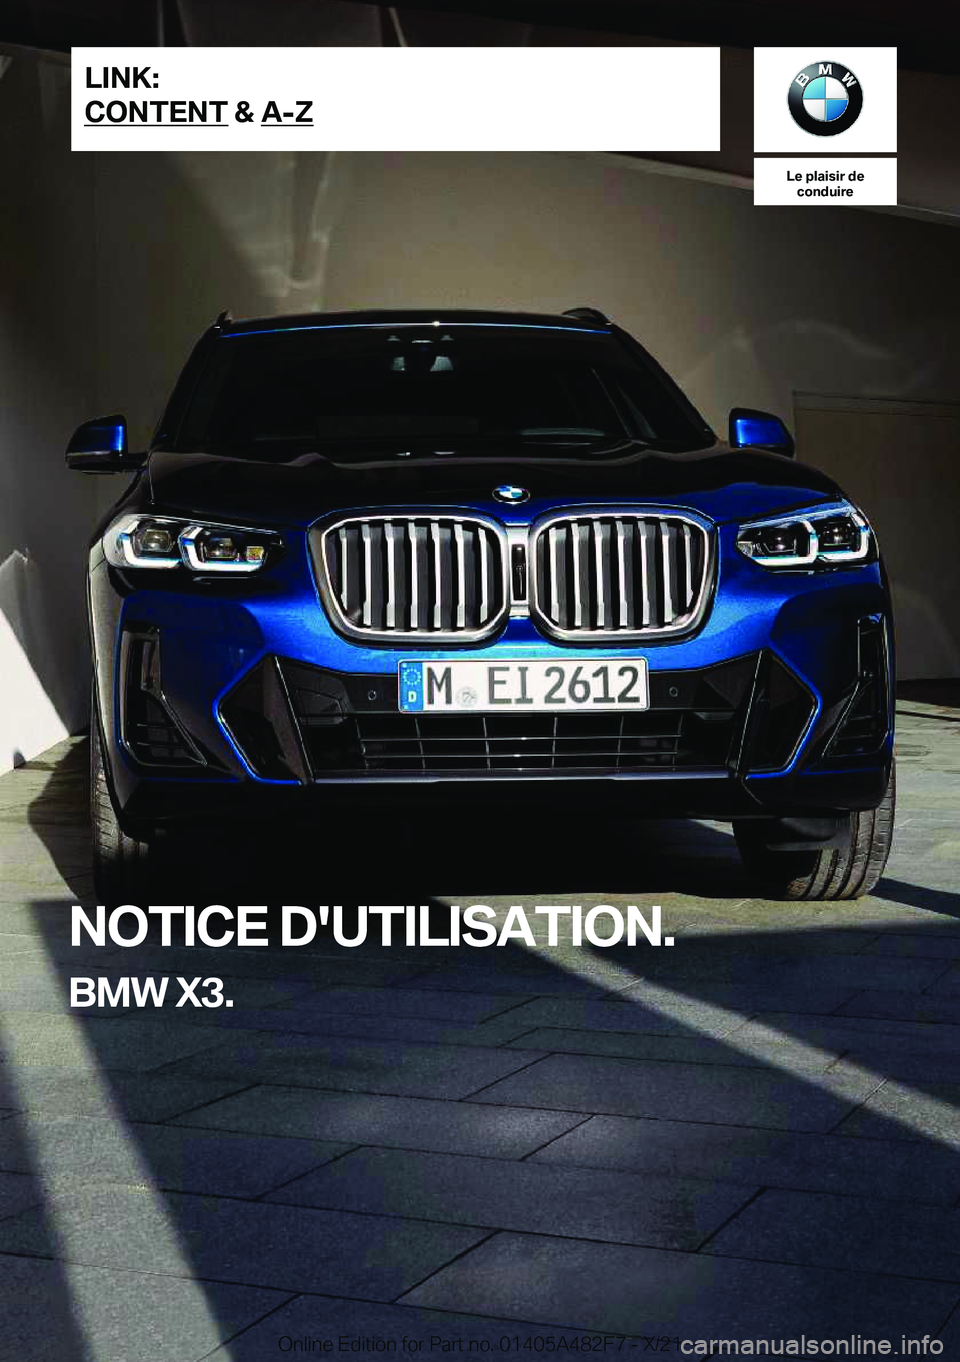 BMW X3 2022  Notices Demploi (in French) �L�e��p�l�a�i�s�i�r��d�e�c�o�n�d�u�i�r�e
�N�O�T�I�C�E��D�'�U�T�I�L�I�S�A�T�I�O�N�.
�B�M�W��X�3�.�L�I�N�K�:
�C�O�N�T�E�N�T��&��A�-�Z�O�n�l�i�n�e��E�d�i�t�i�o�n��f�o�r��P�a�r�t��n�o�.��0�